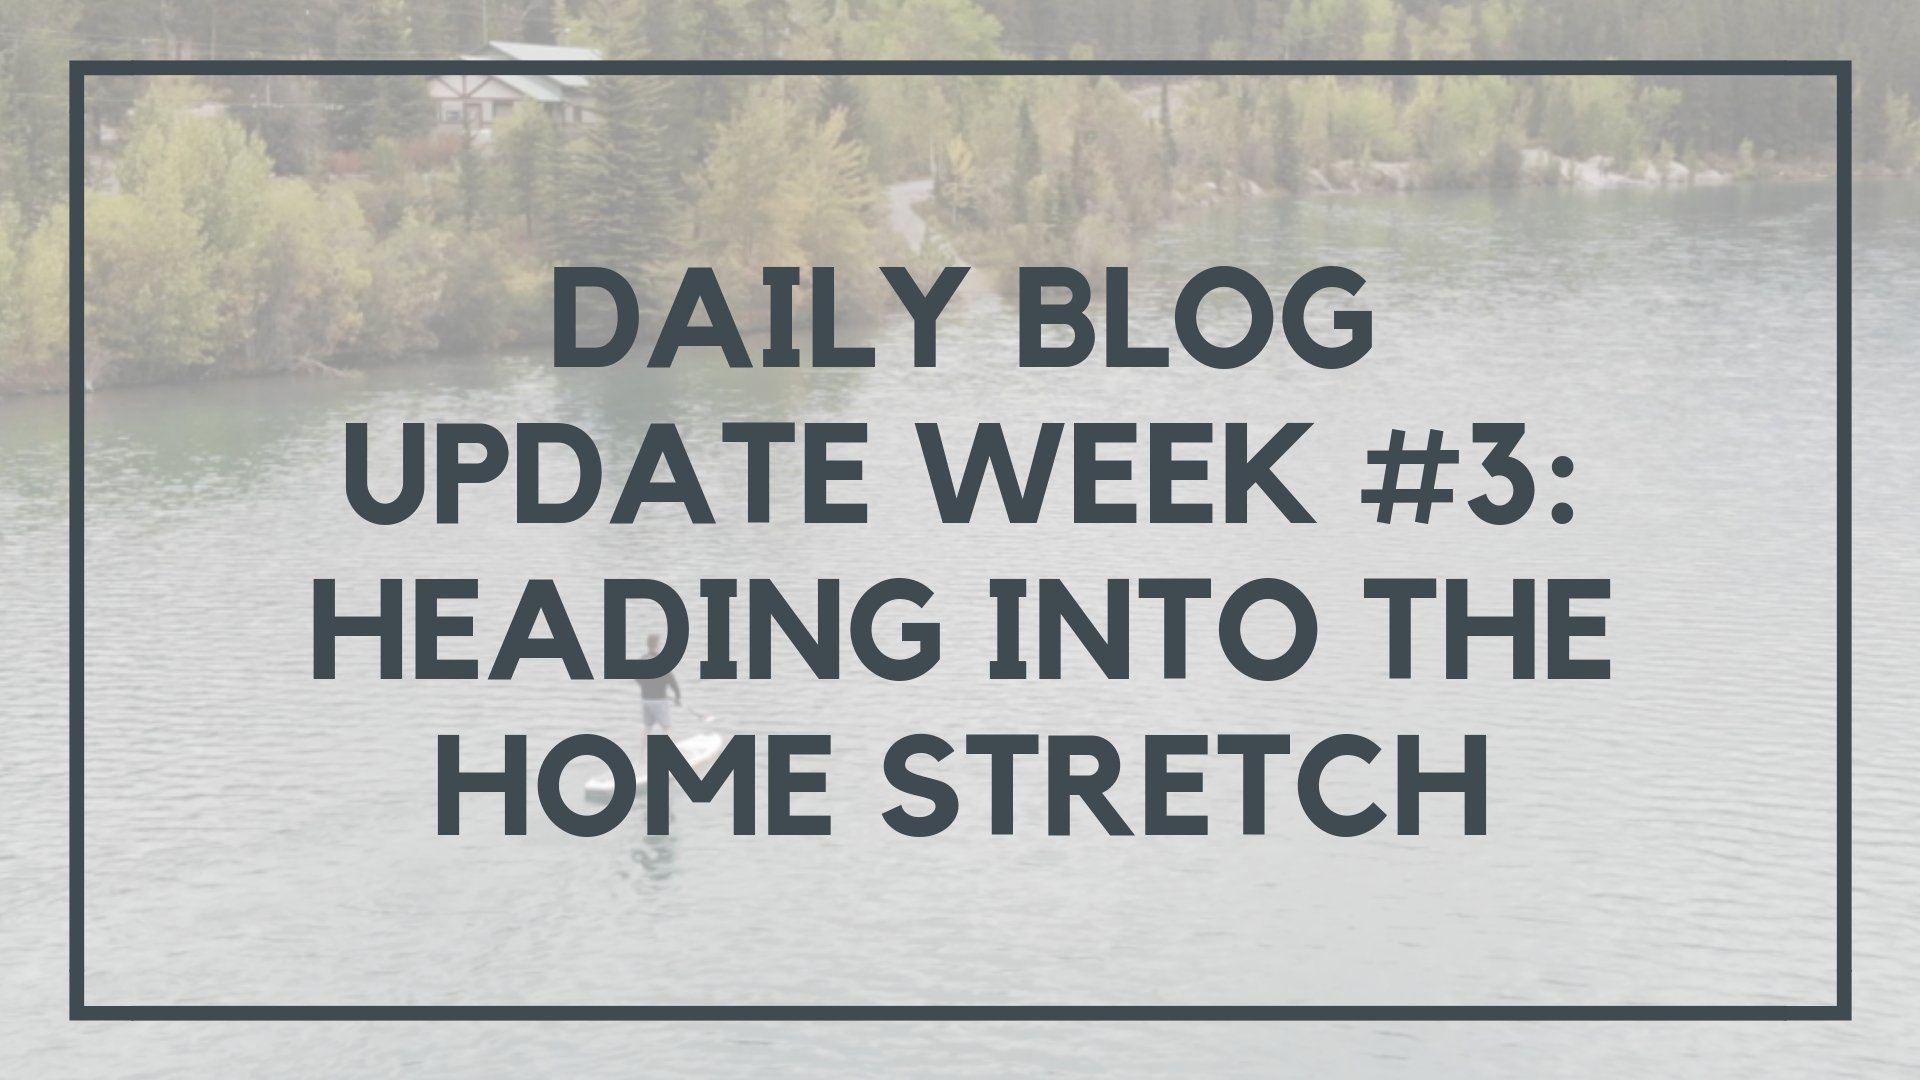 Daily Blog Update Week #3: Heading into the Home Stretch